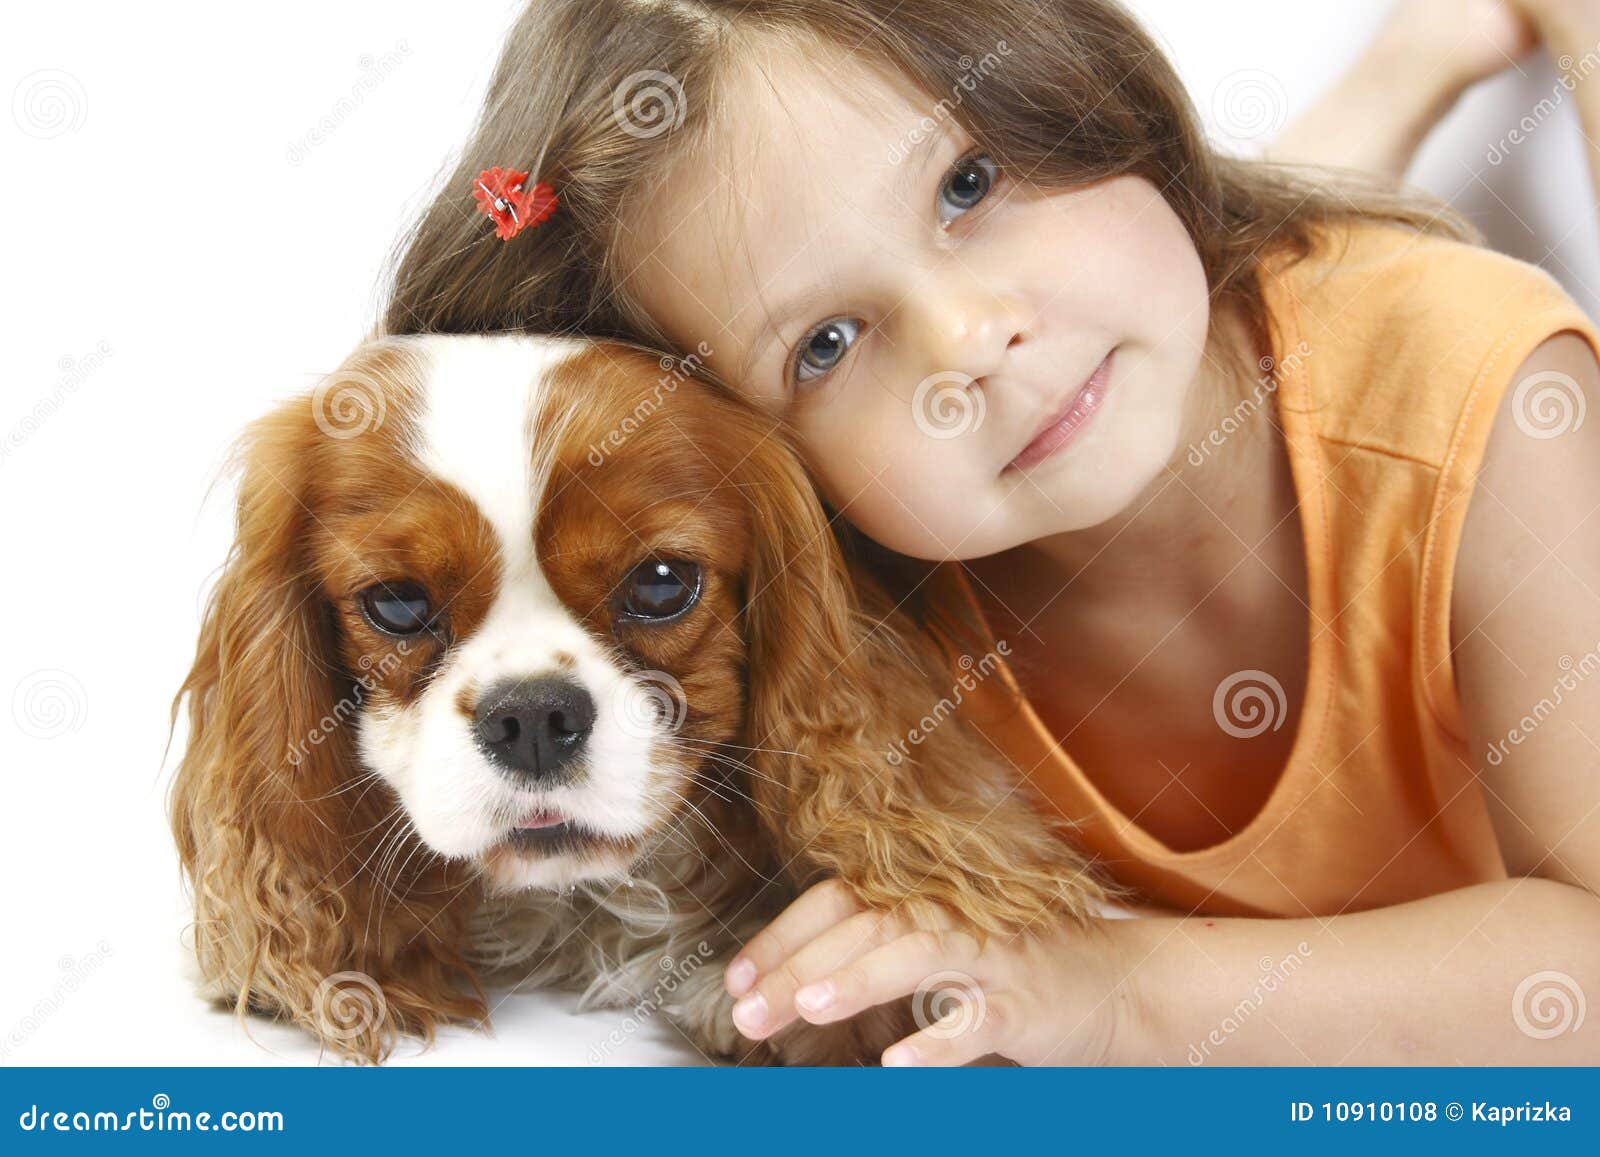 11,125 Isolated Girl Dog Photos - Free & Royalty-Free Stock Photos from  Dreamstime